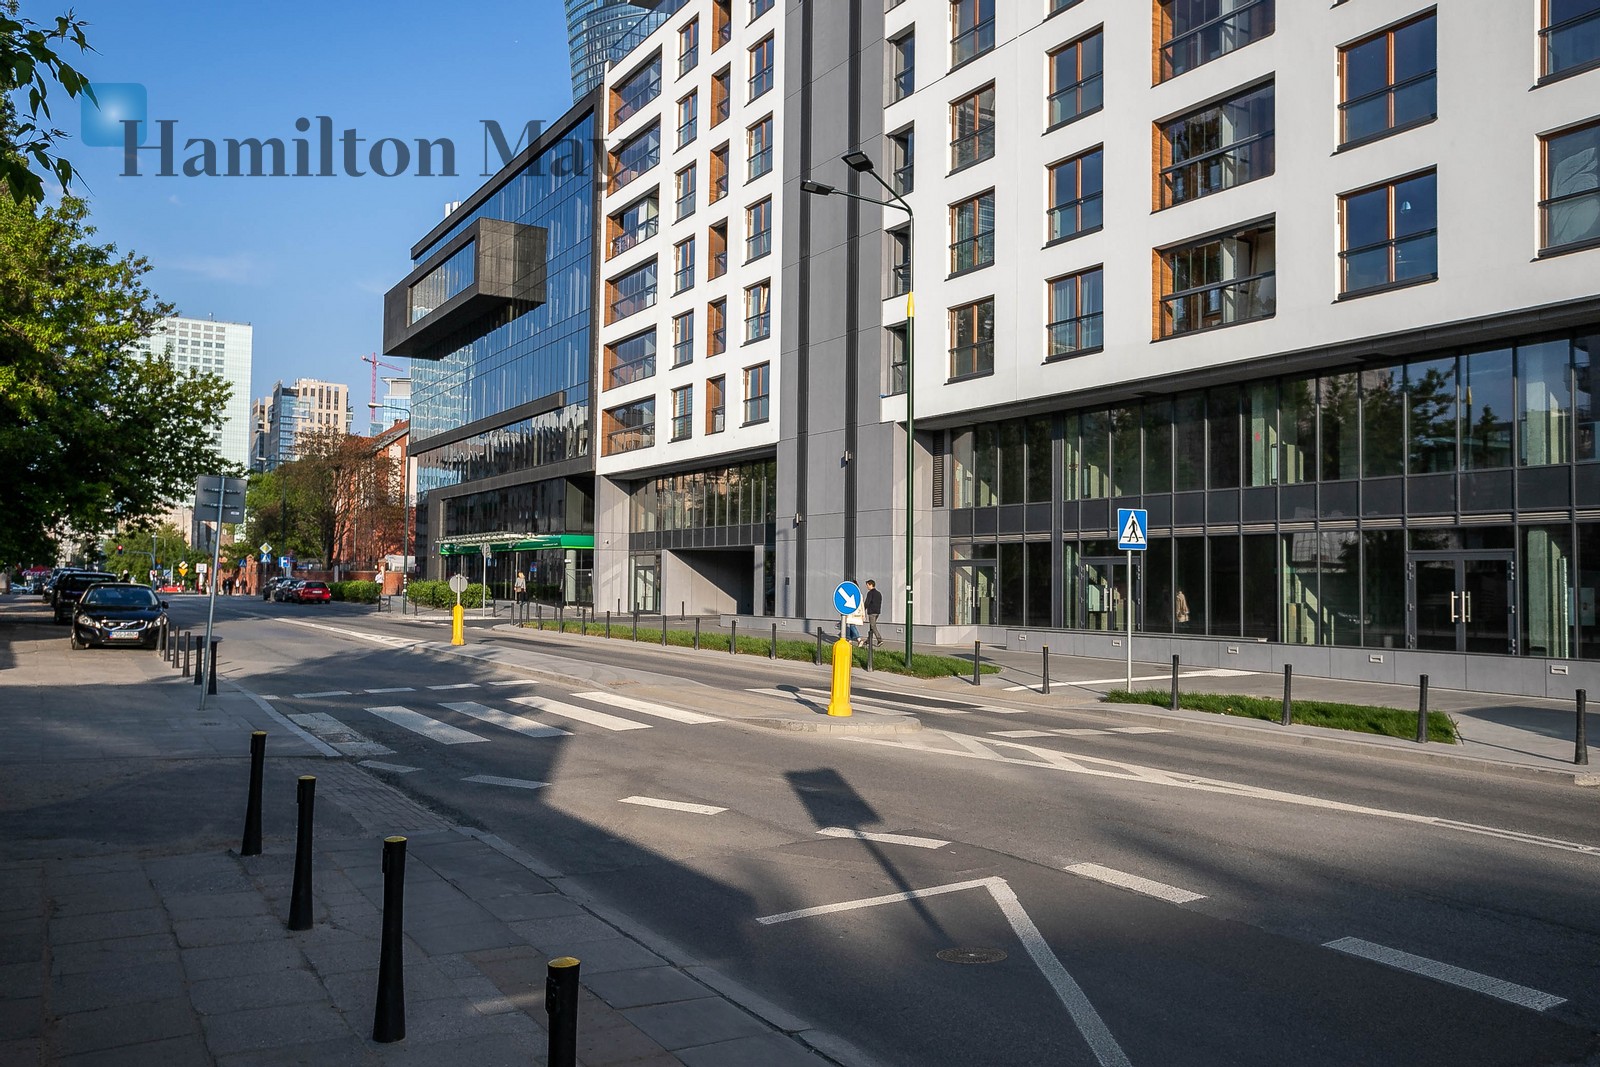 Level: 9 Status: existing Number of units: 500 Sale price from: 338651PLN Avg. sales price/m2: 14000PLN Rental price from: nullPLN Avg. rental price/m2: nullPLN